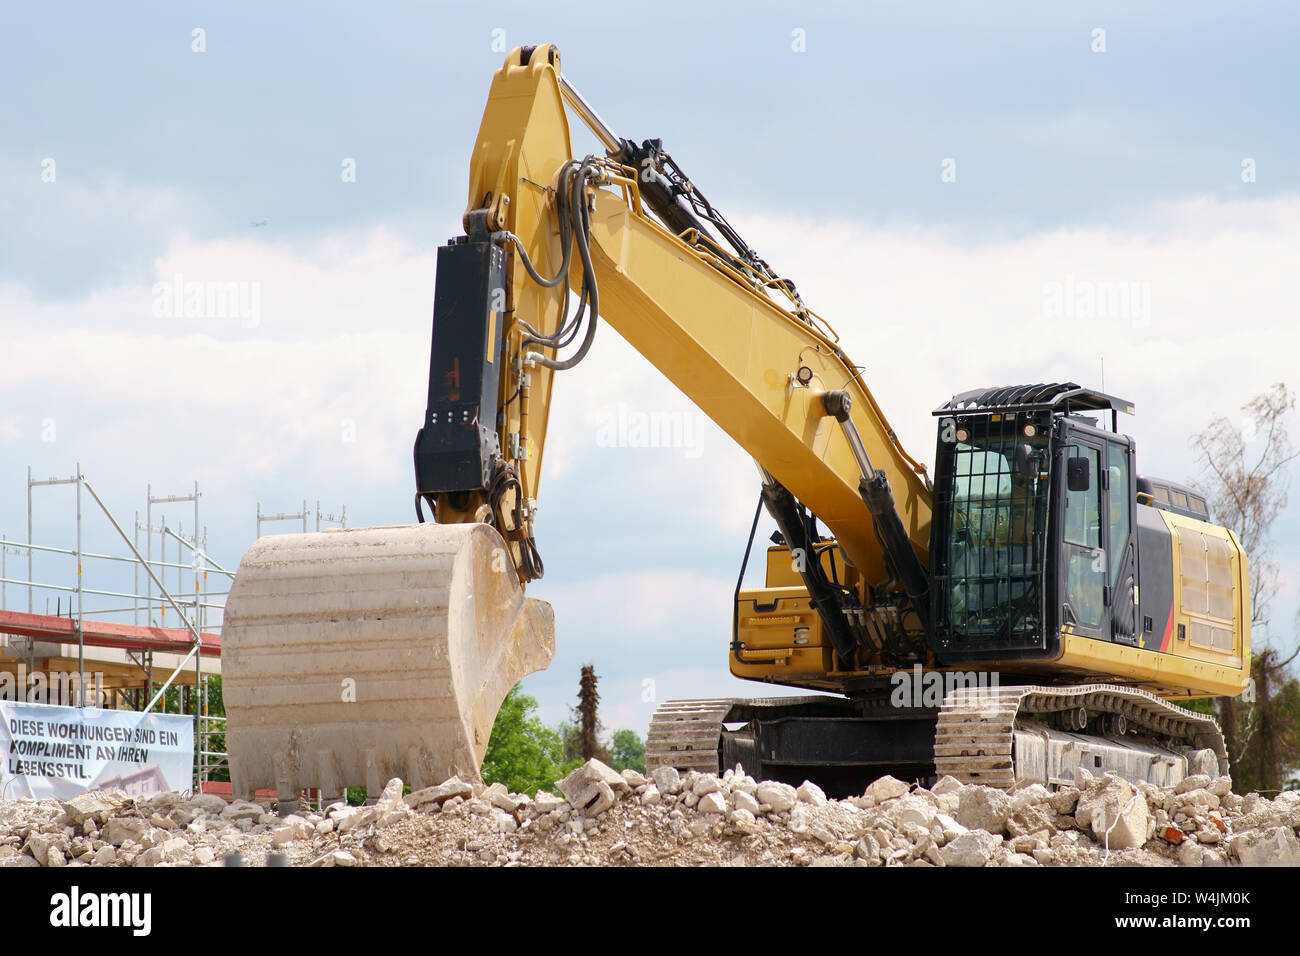 A non-working excavator stands on the rubble heap of a construction site. Stock Photo